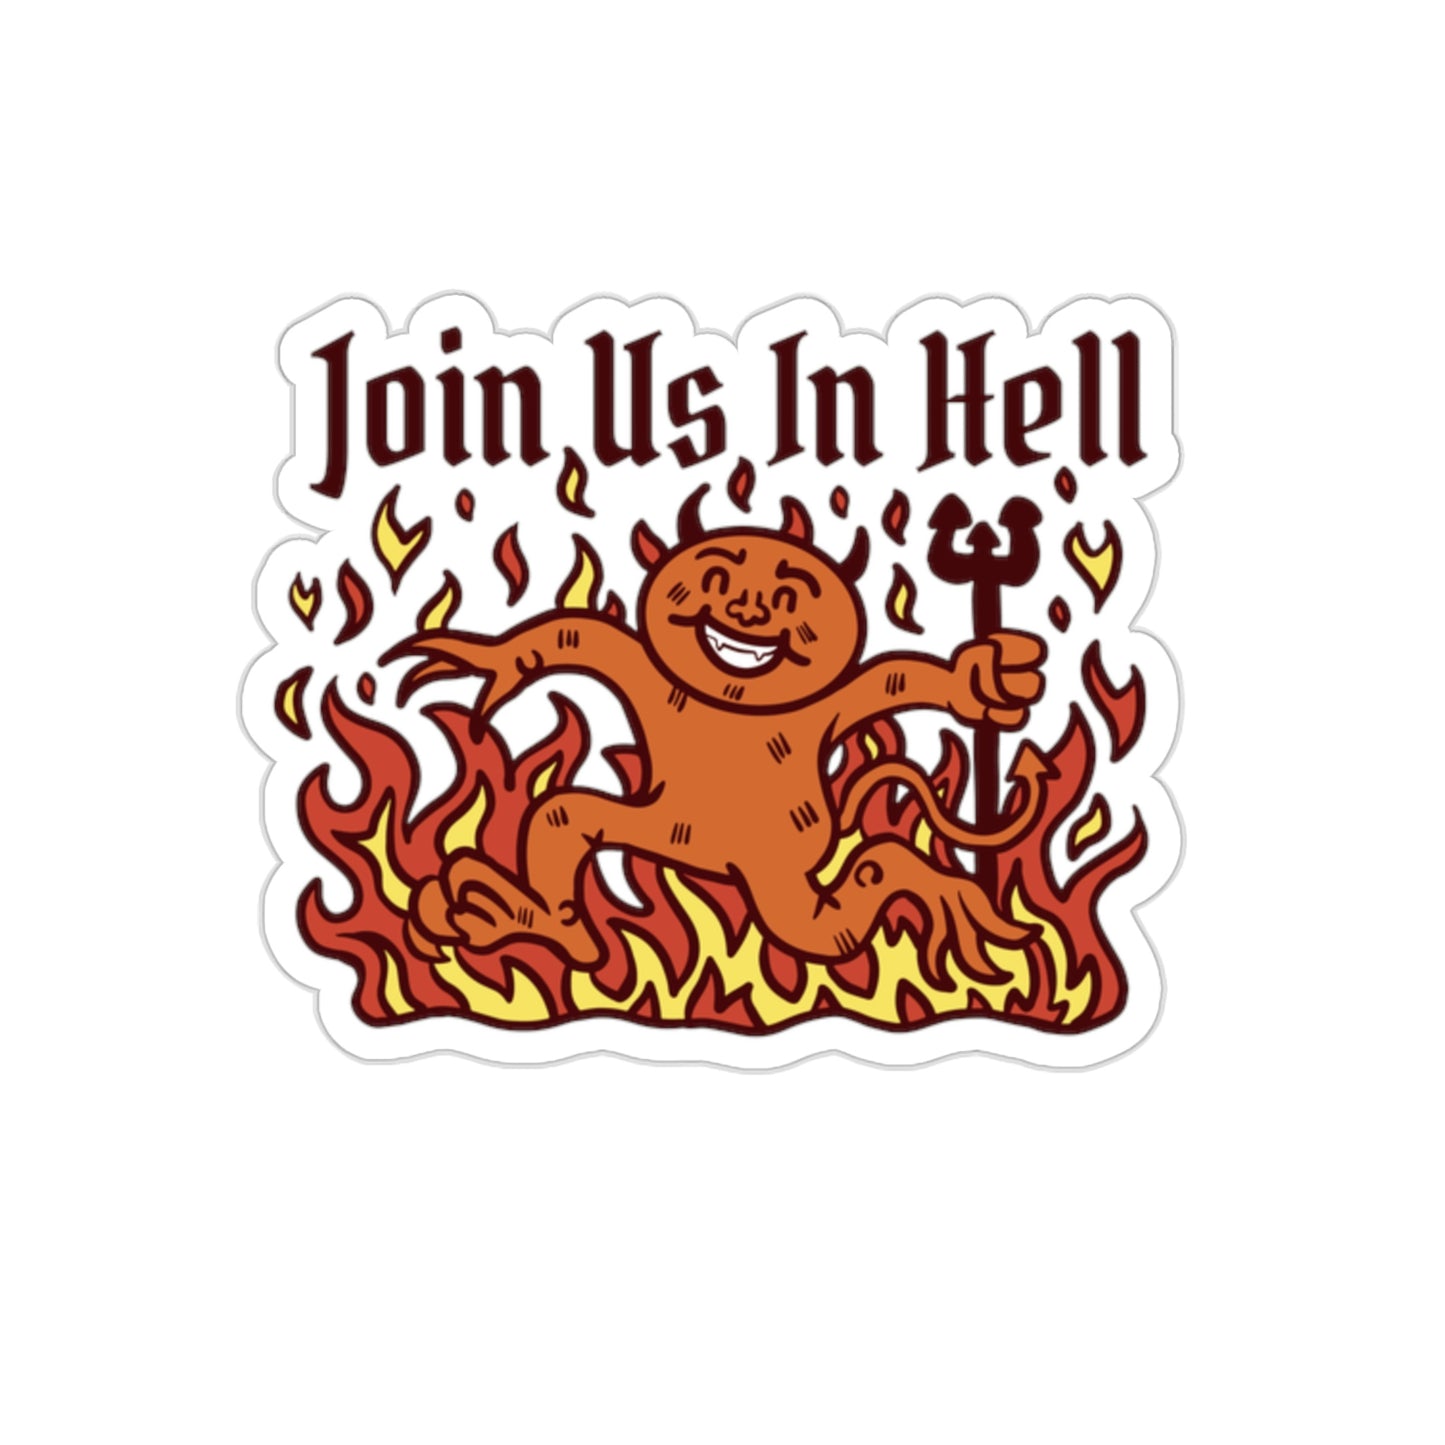 Join Us In Hell Cute Demon, Goth Aesthetic Sticker